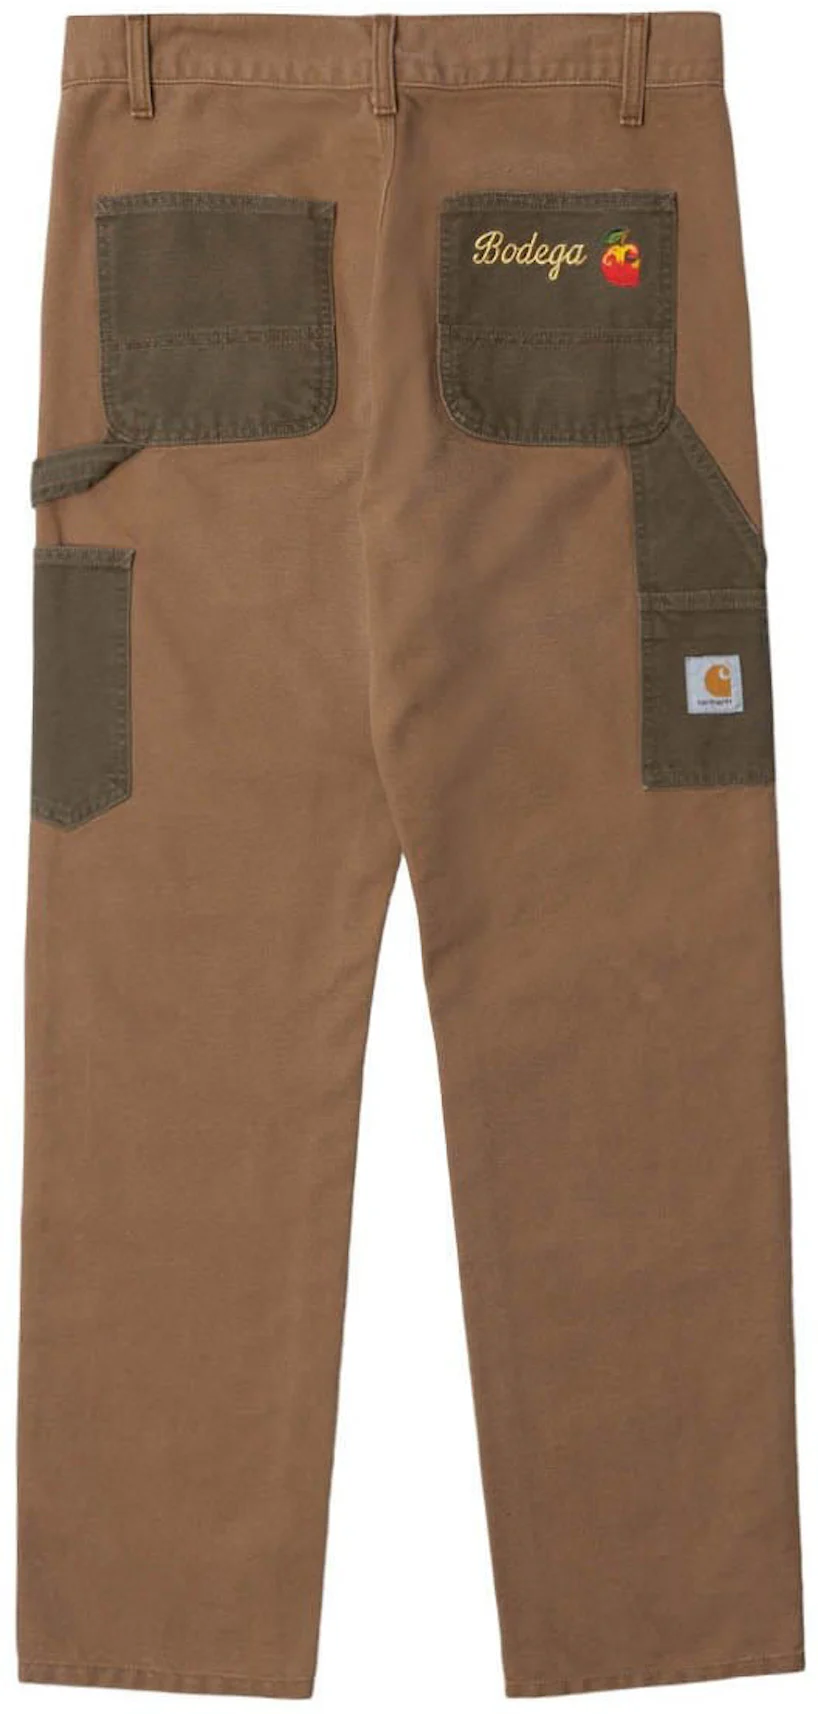 Relaxed Fit Single Knee Pants Hamilton Brown, Carhartt WIP